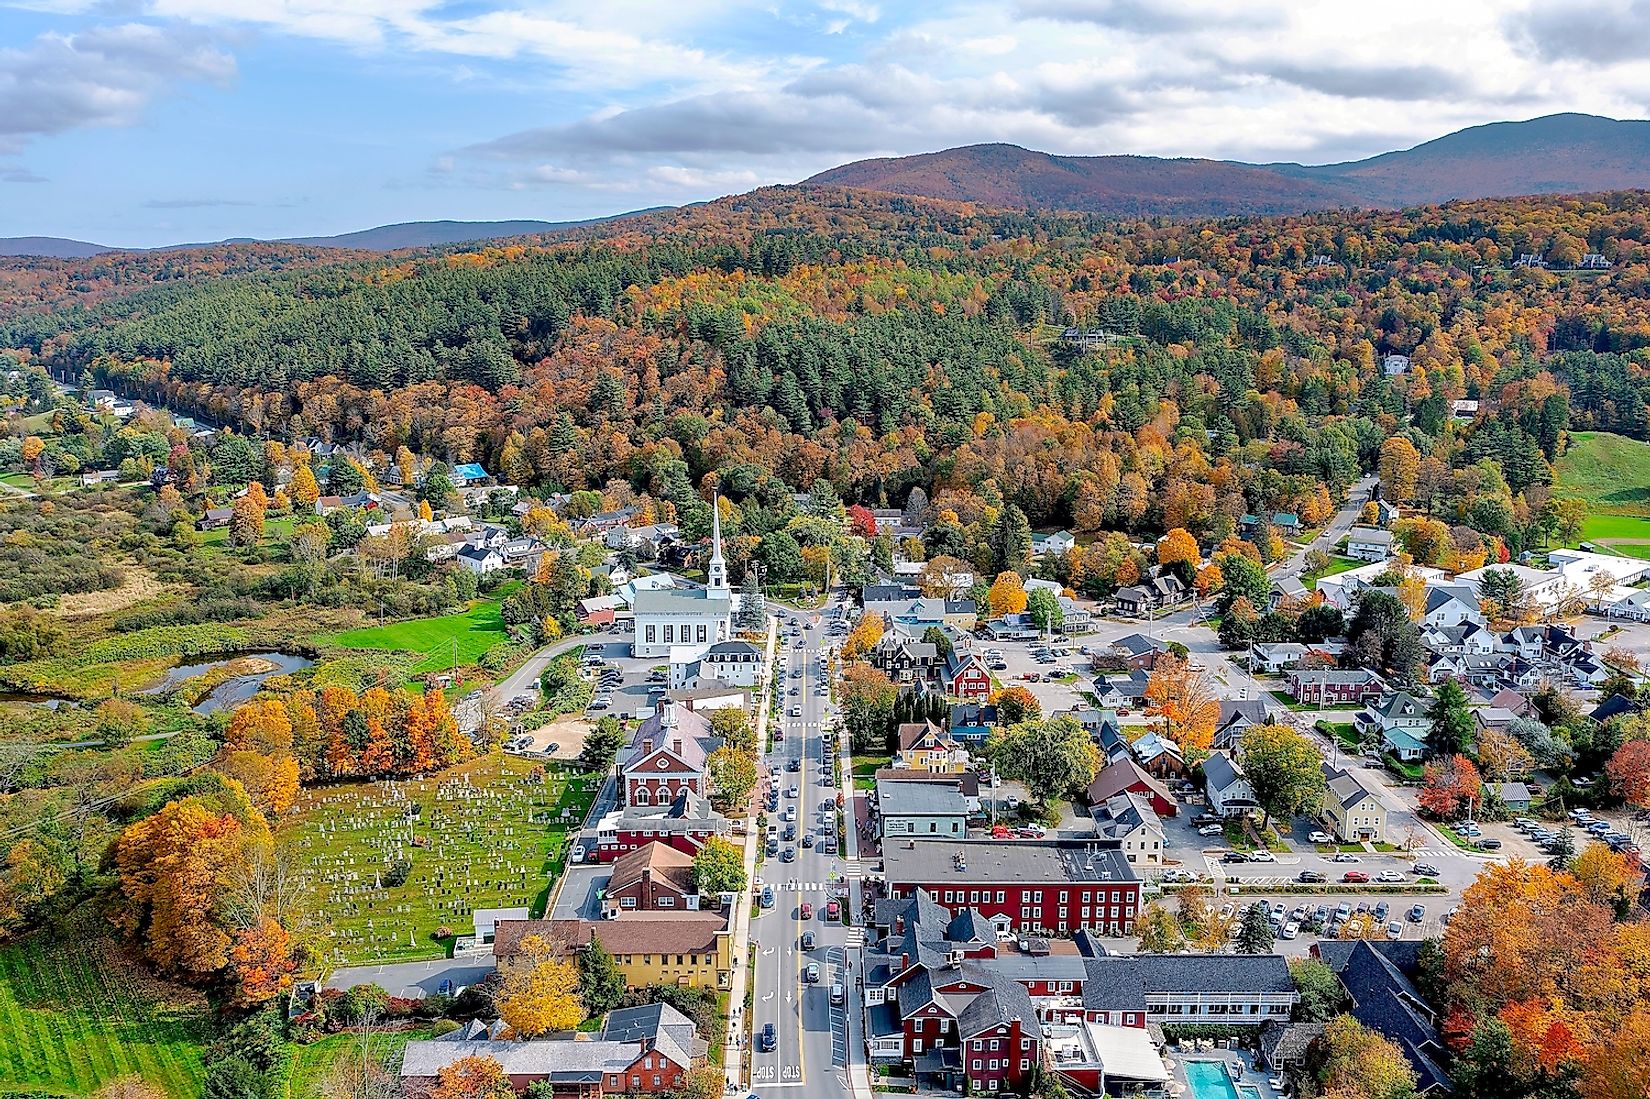 Aerial view of Stowe, Vermont in the fall.